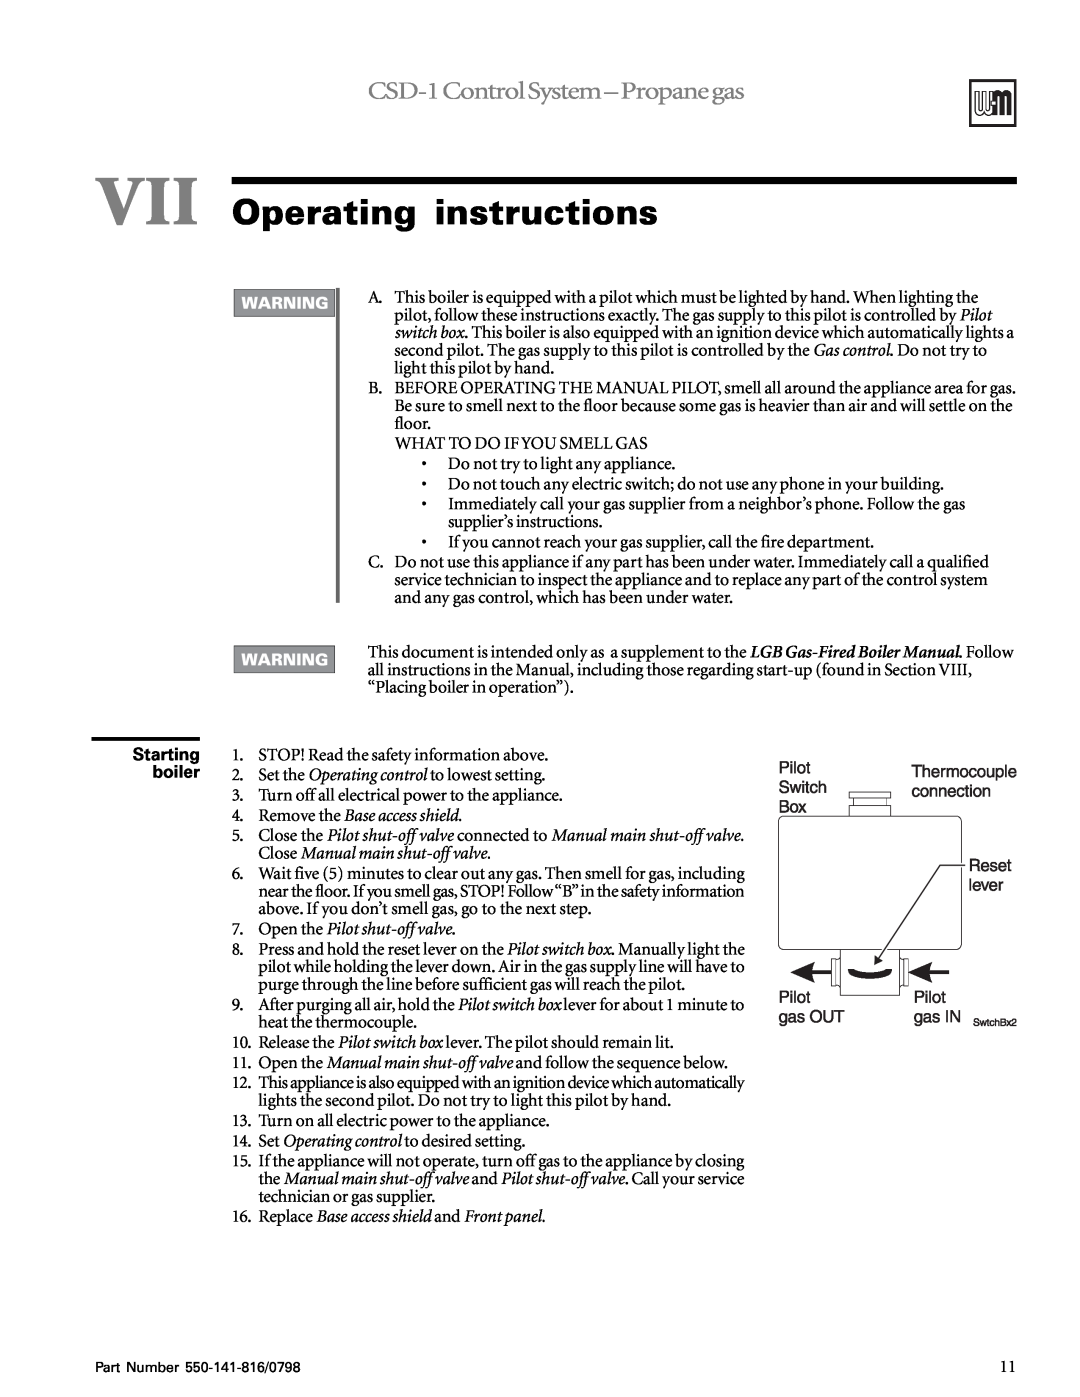 Weil-McLain 6-20 Series operating instructions VII Operating instructions, Starting boiler, CSD-1ControlSystem-Propanegas 